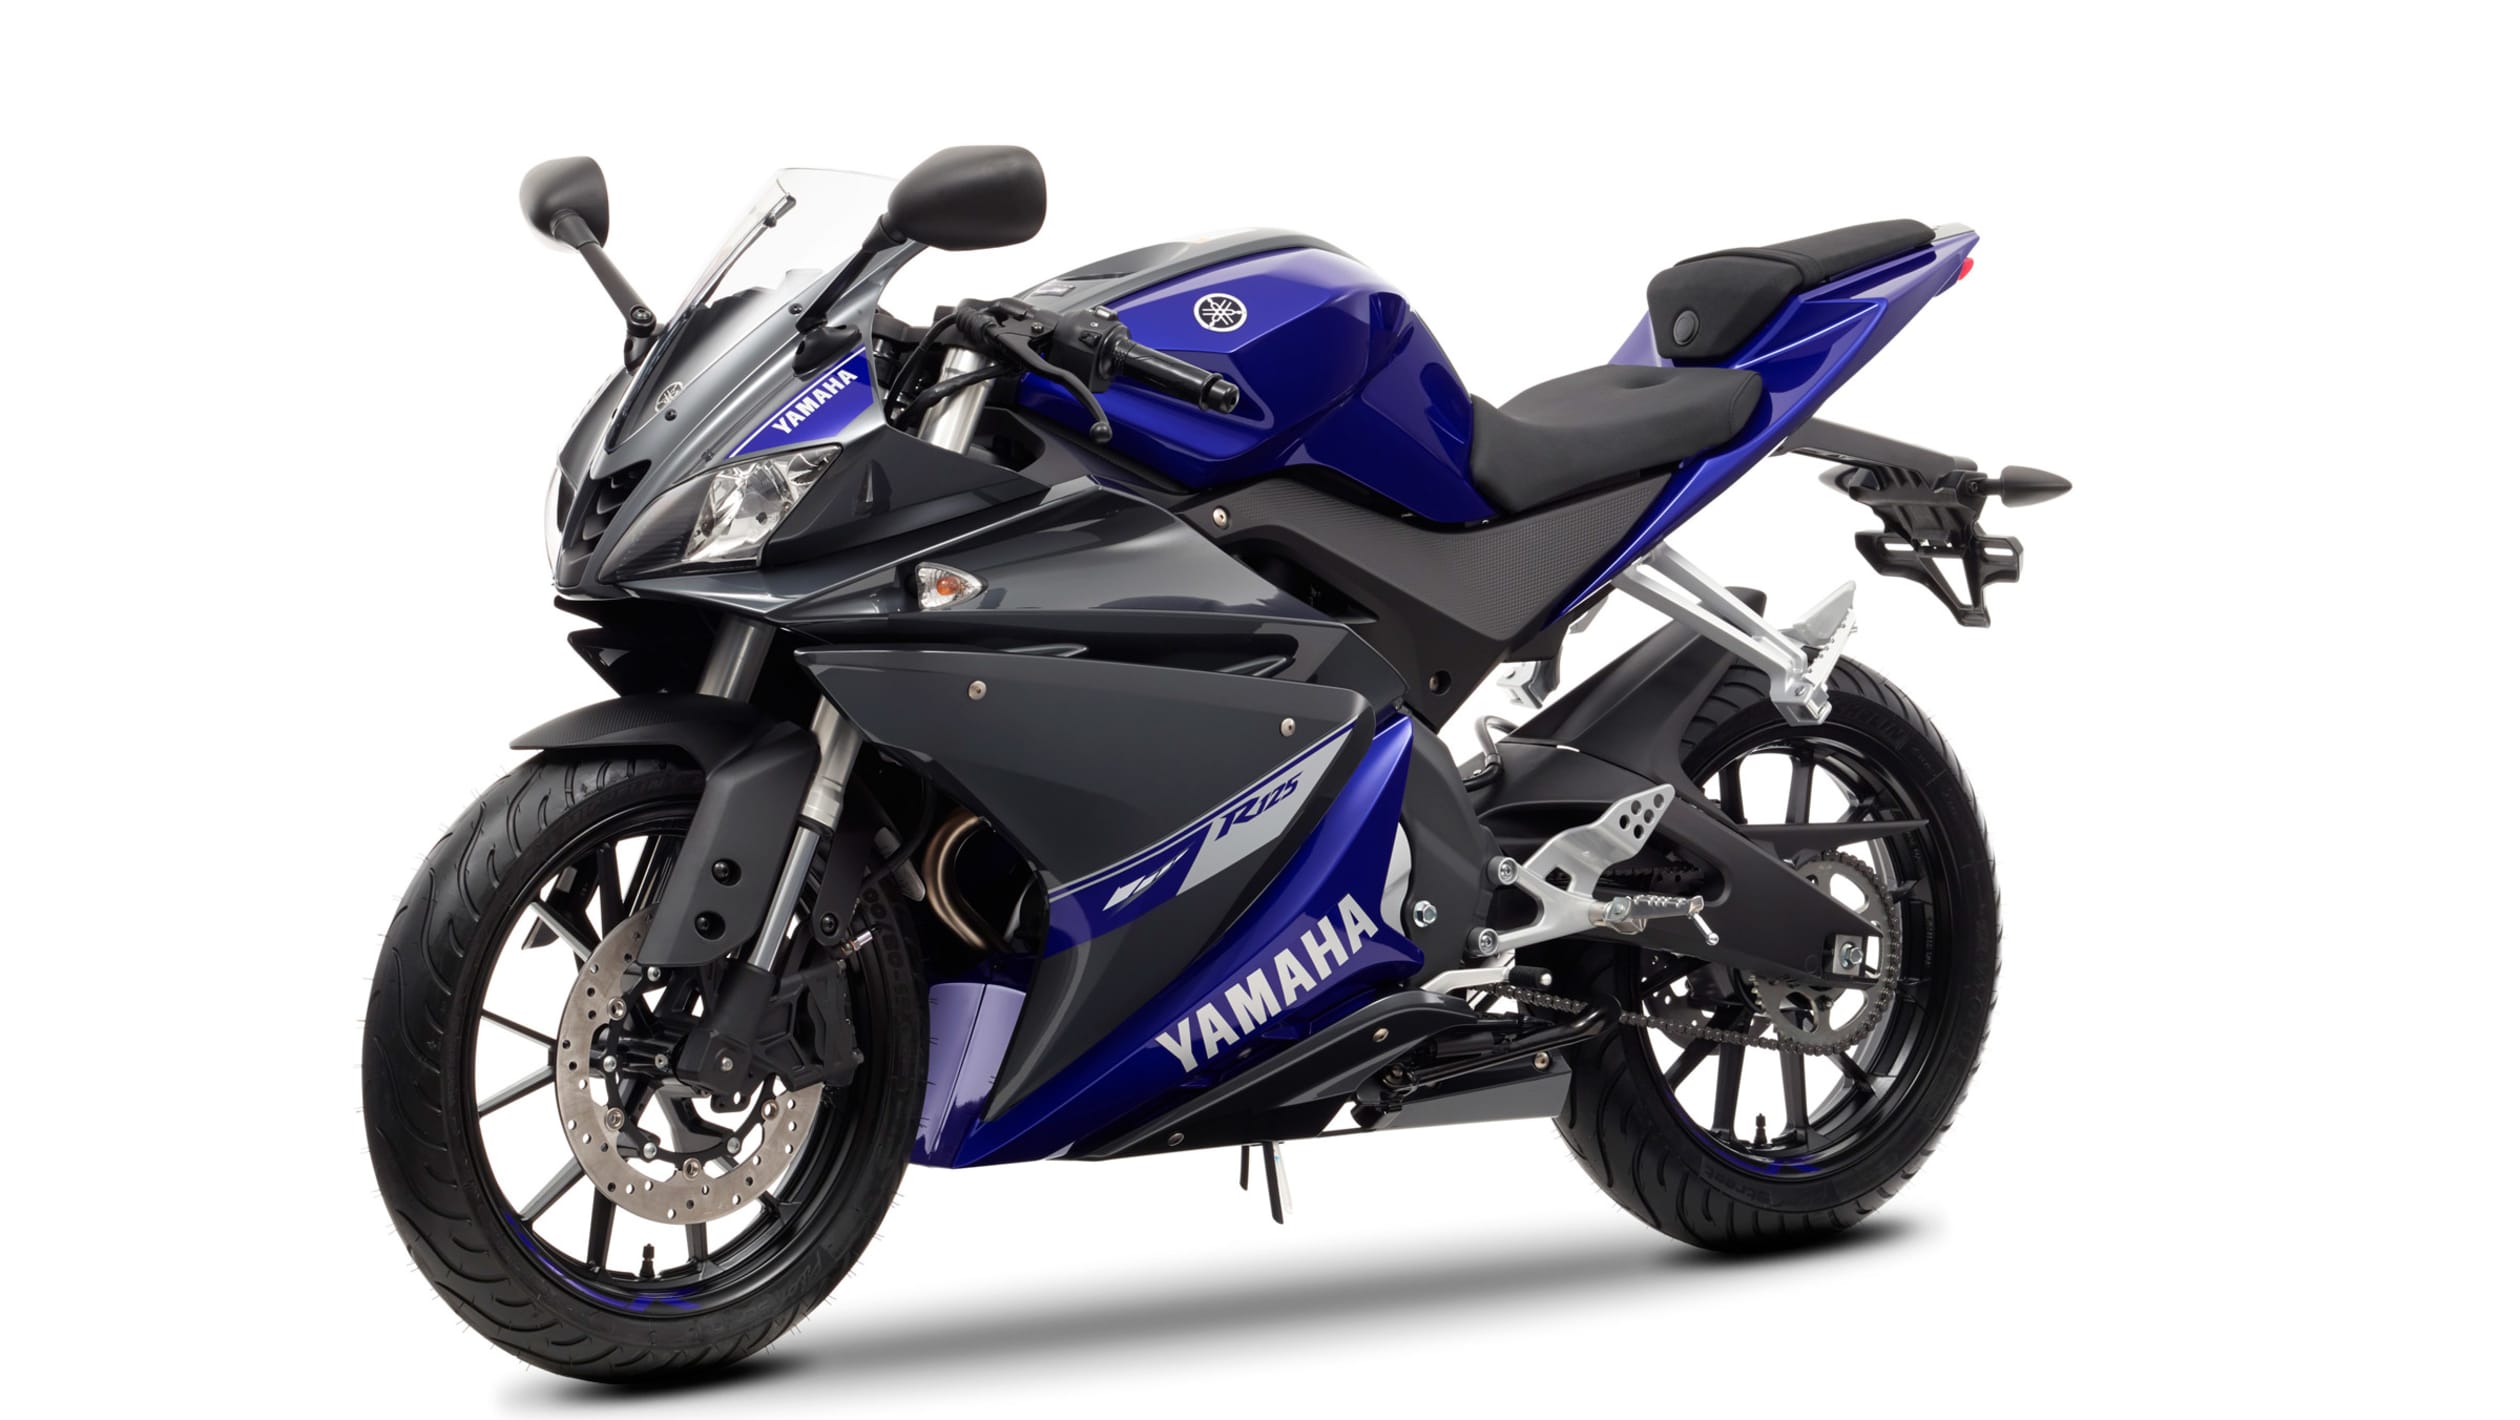 Yamaha YZF-R125 review - pictures